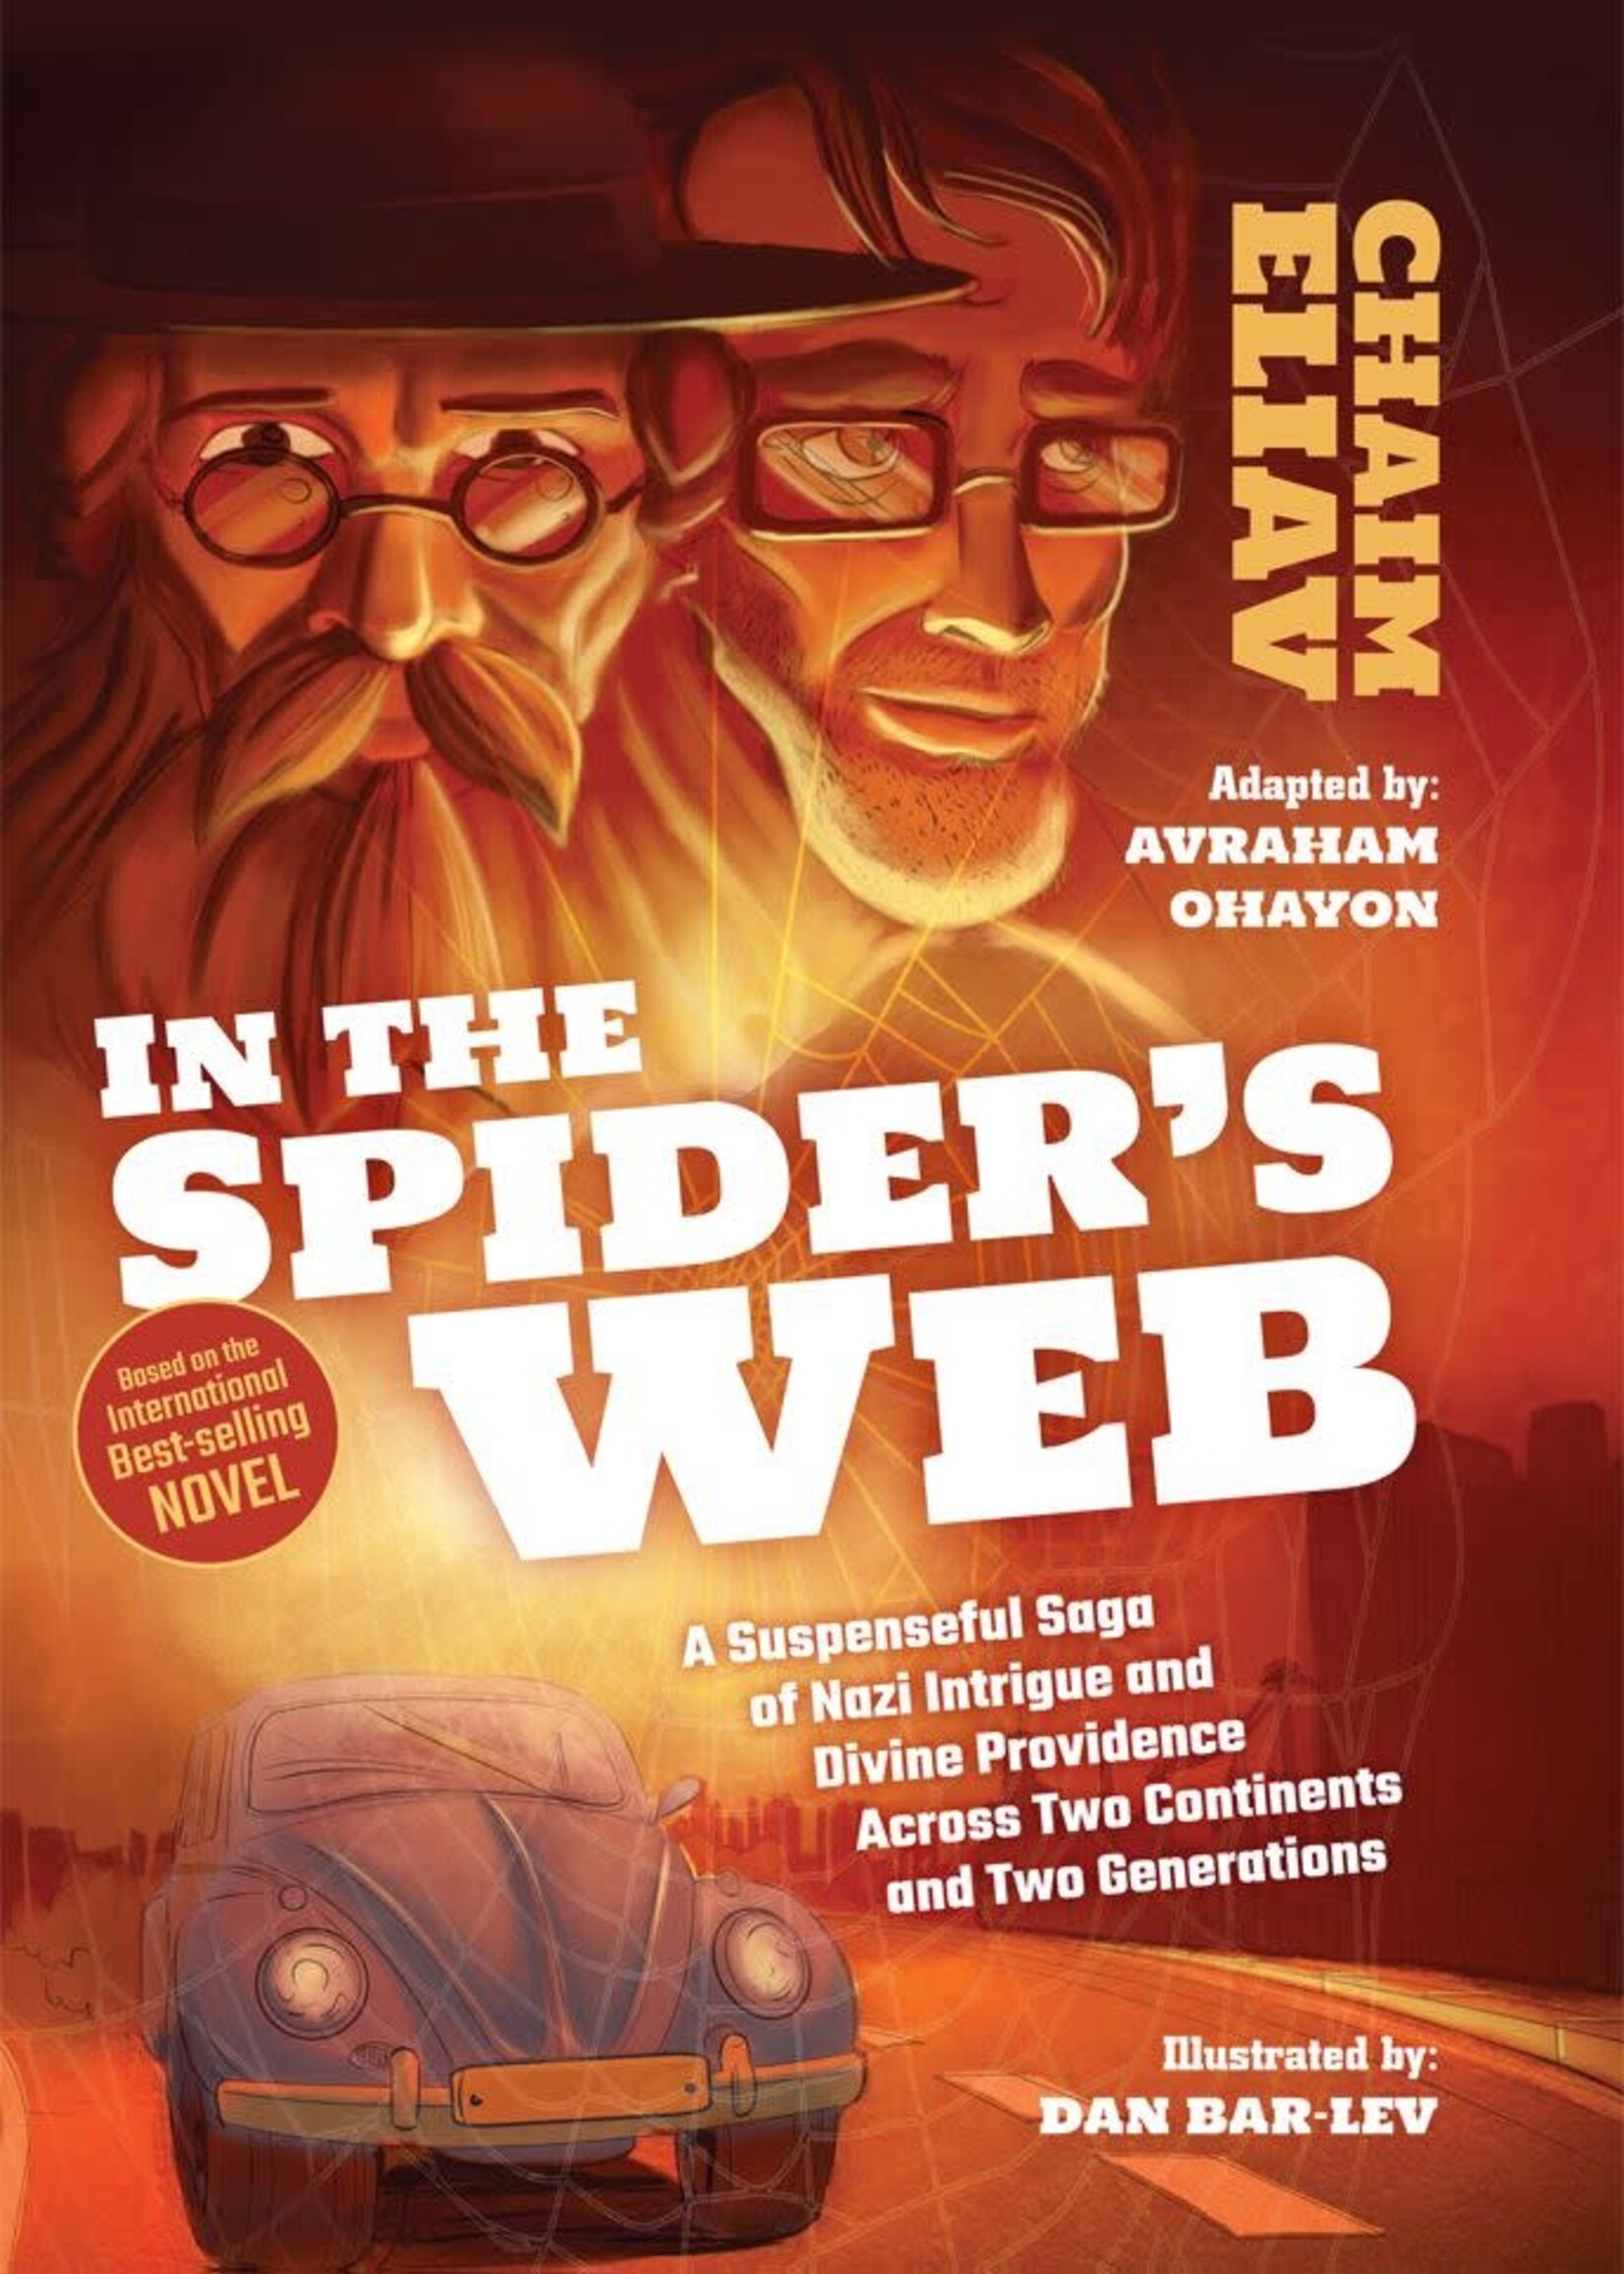 Avraham Ohayon In The Spider's Web (Comic)